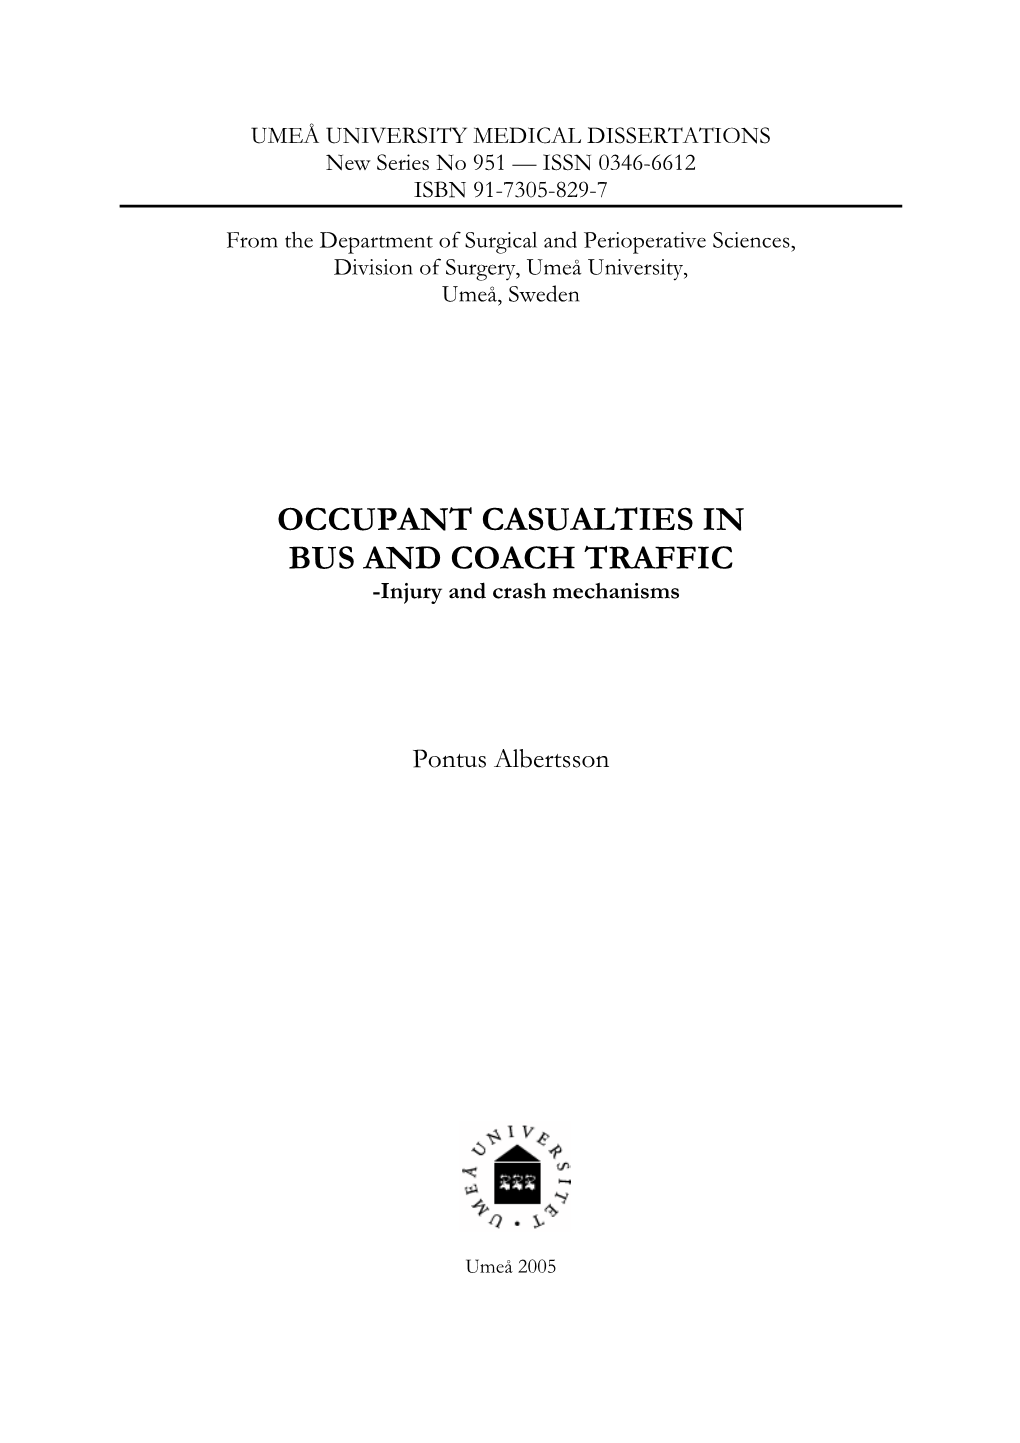 OCCUPANT CASUALTIES in BUS and COACH TRAFFIC -Injury and Crash Mechanisms